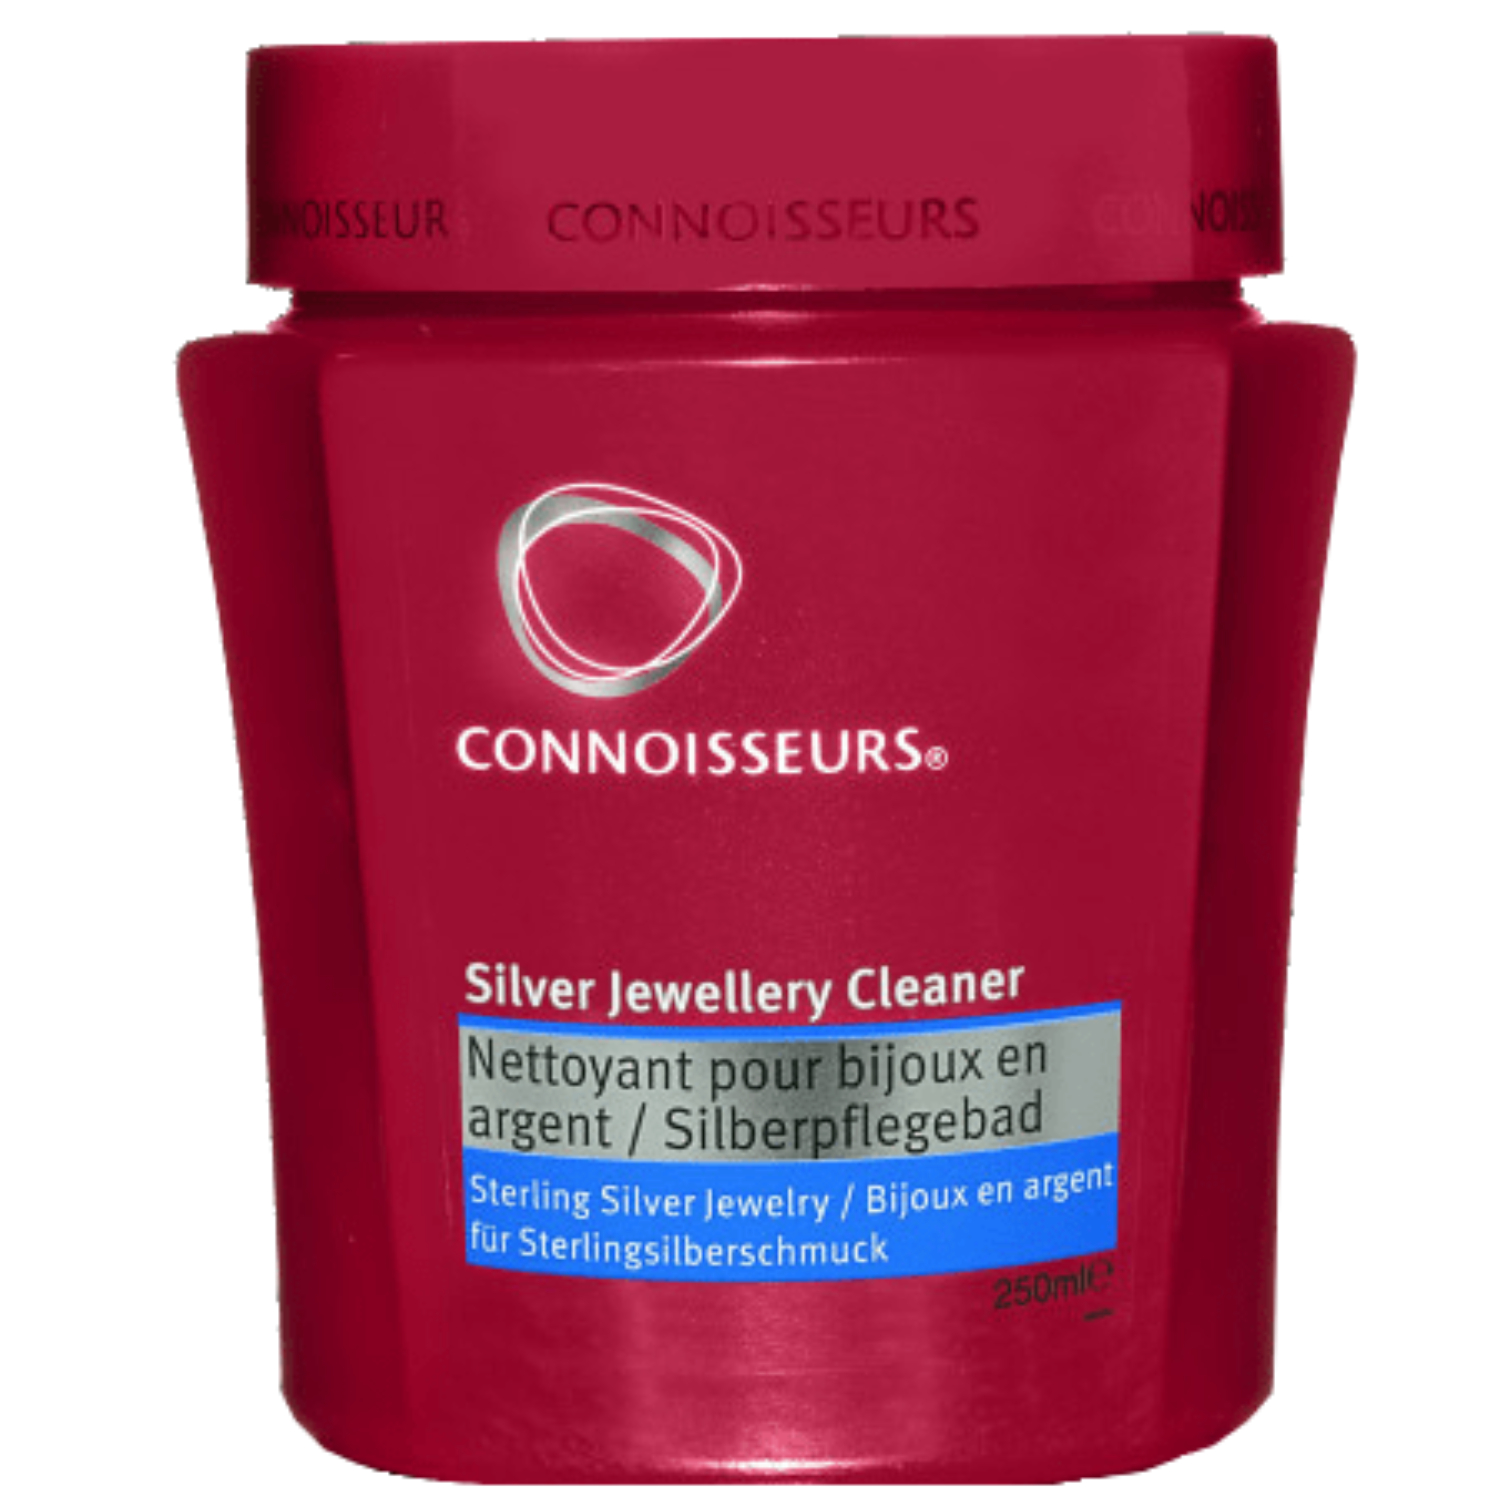 CONNOISSEURS Silver Jewellery Cleaner, 236ml